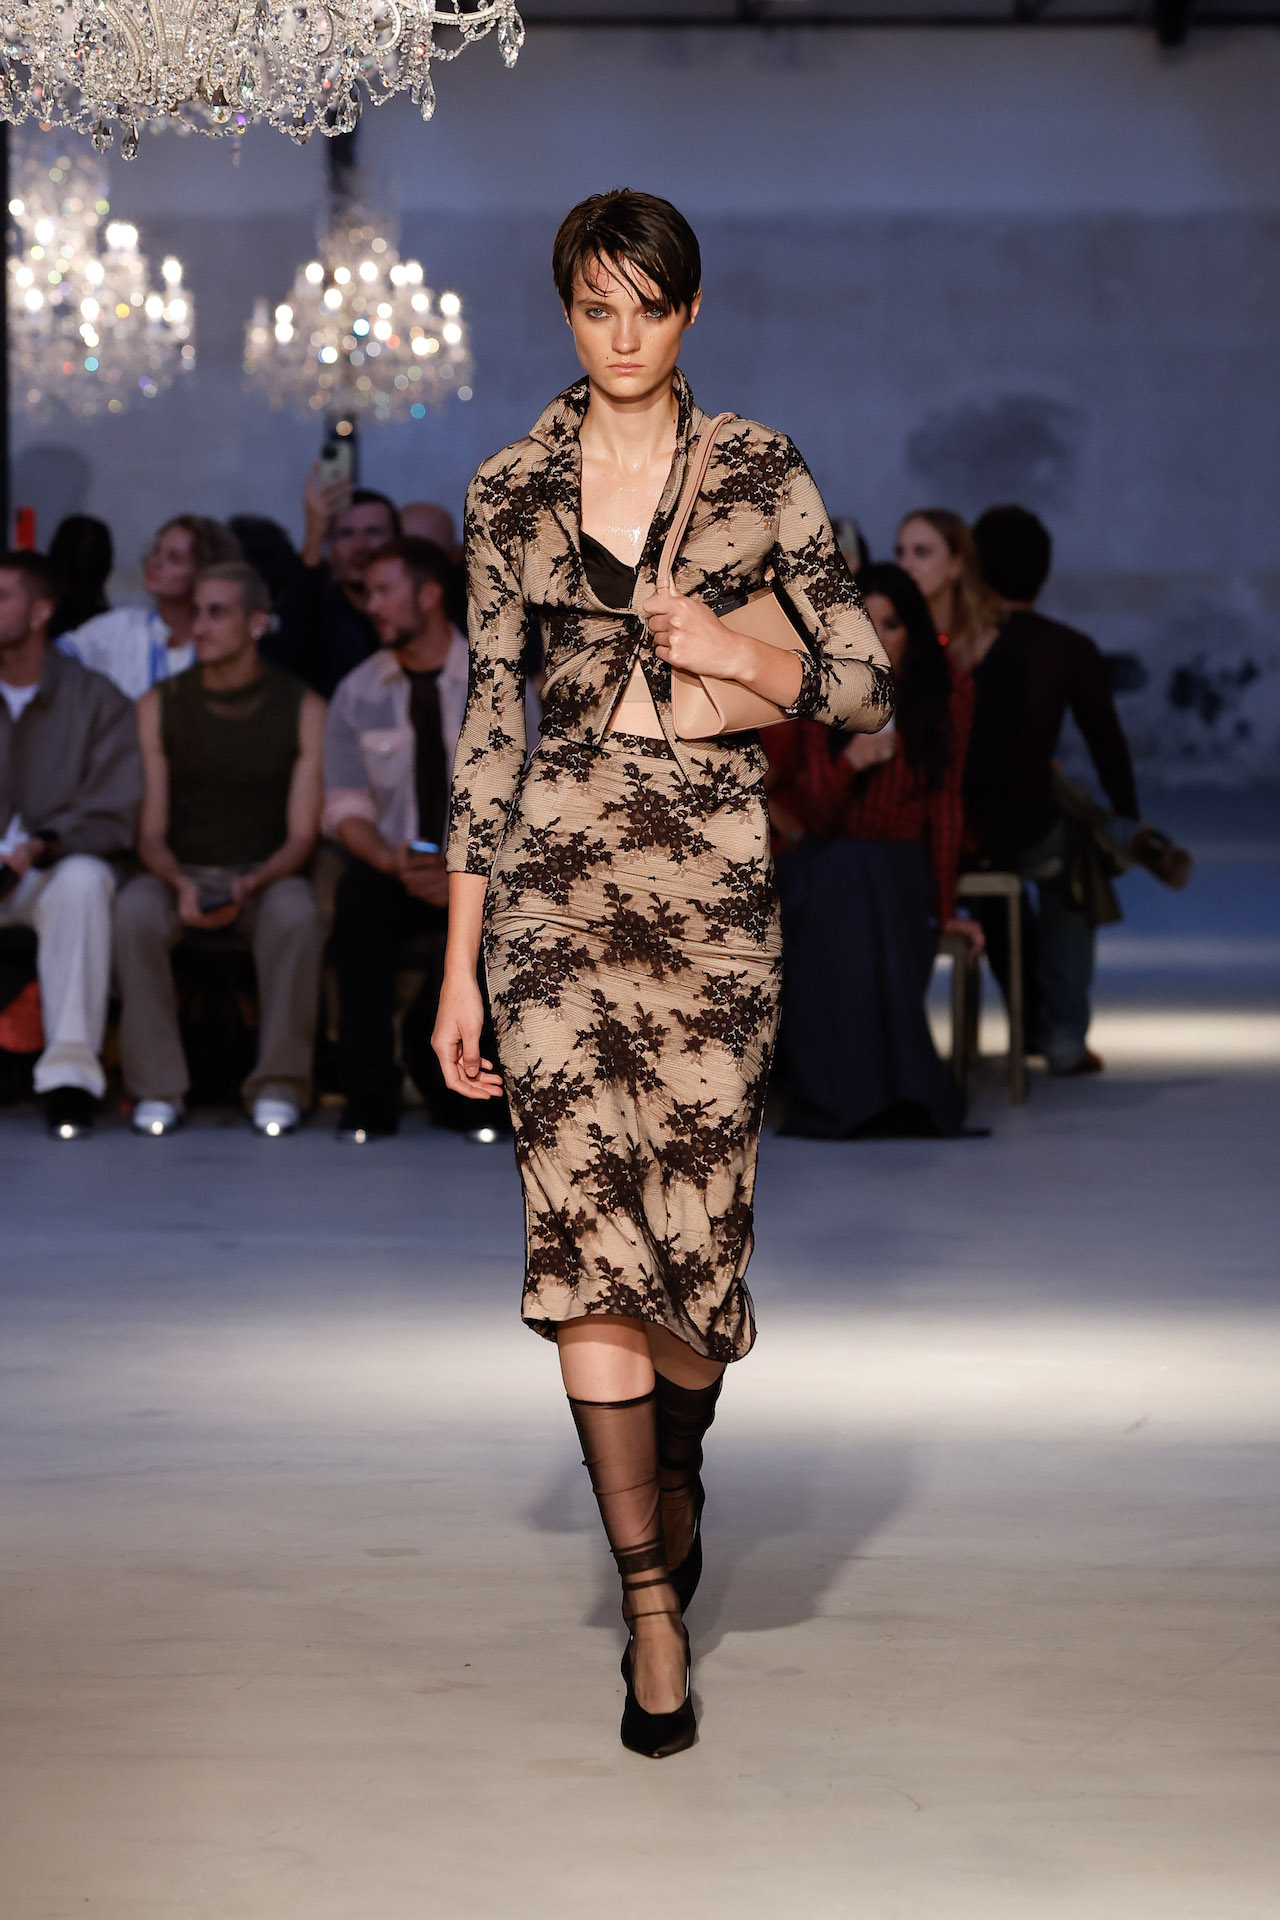 MILAN (AP) — Milan designers continue to blur the lines between female